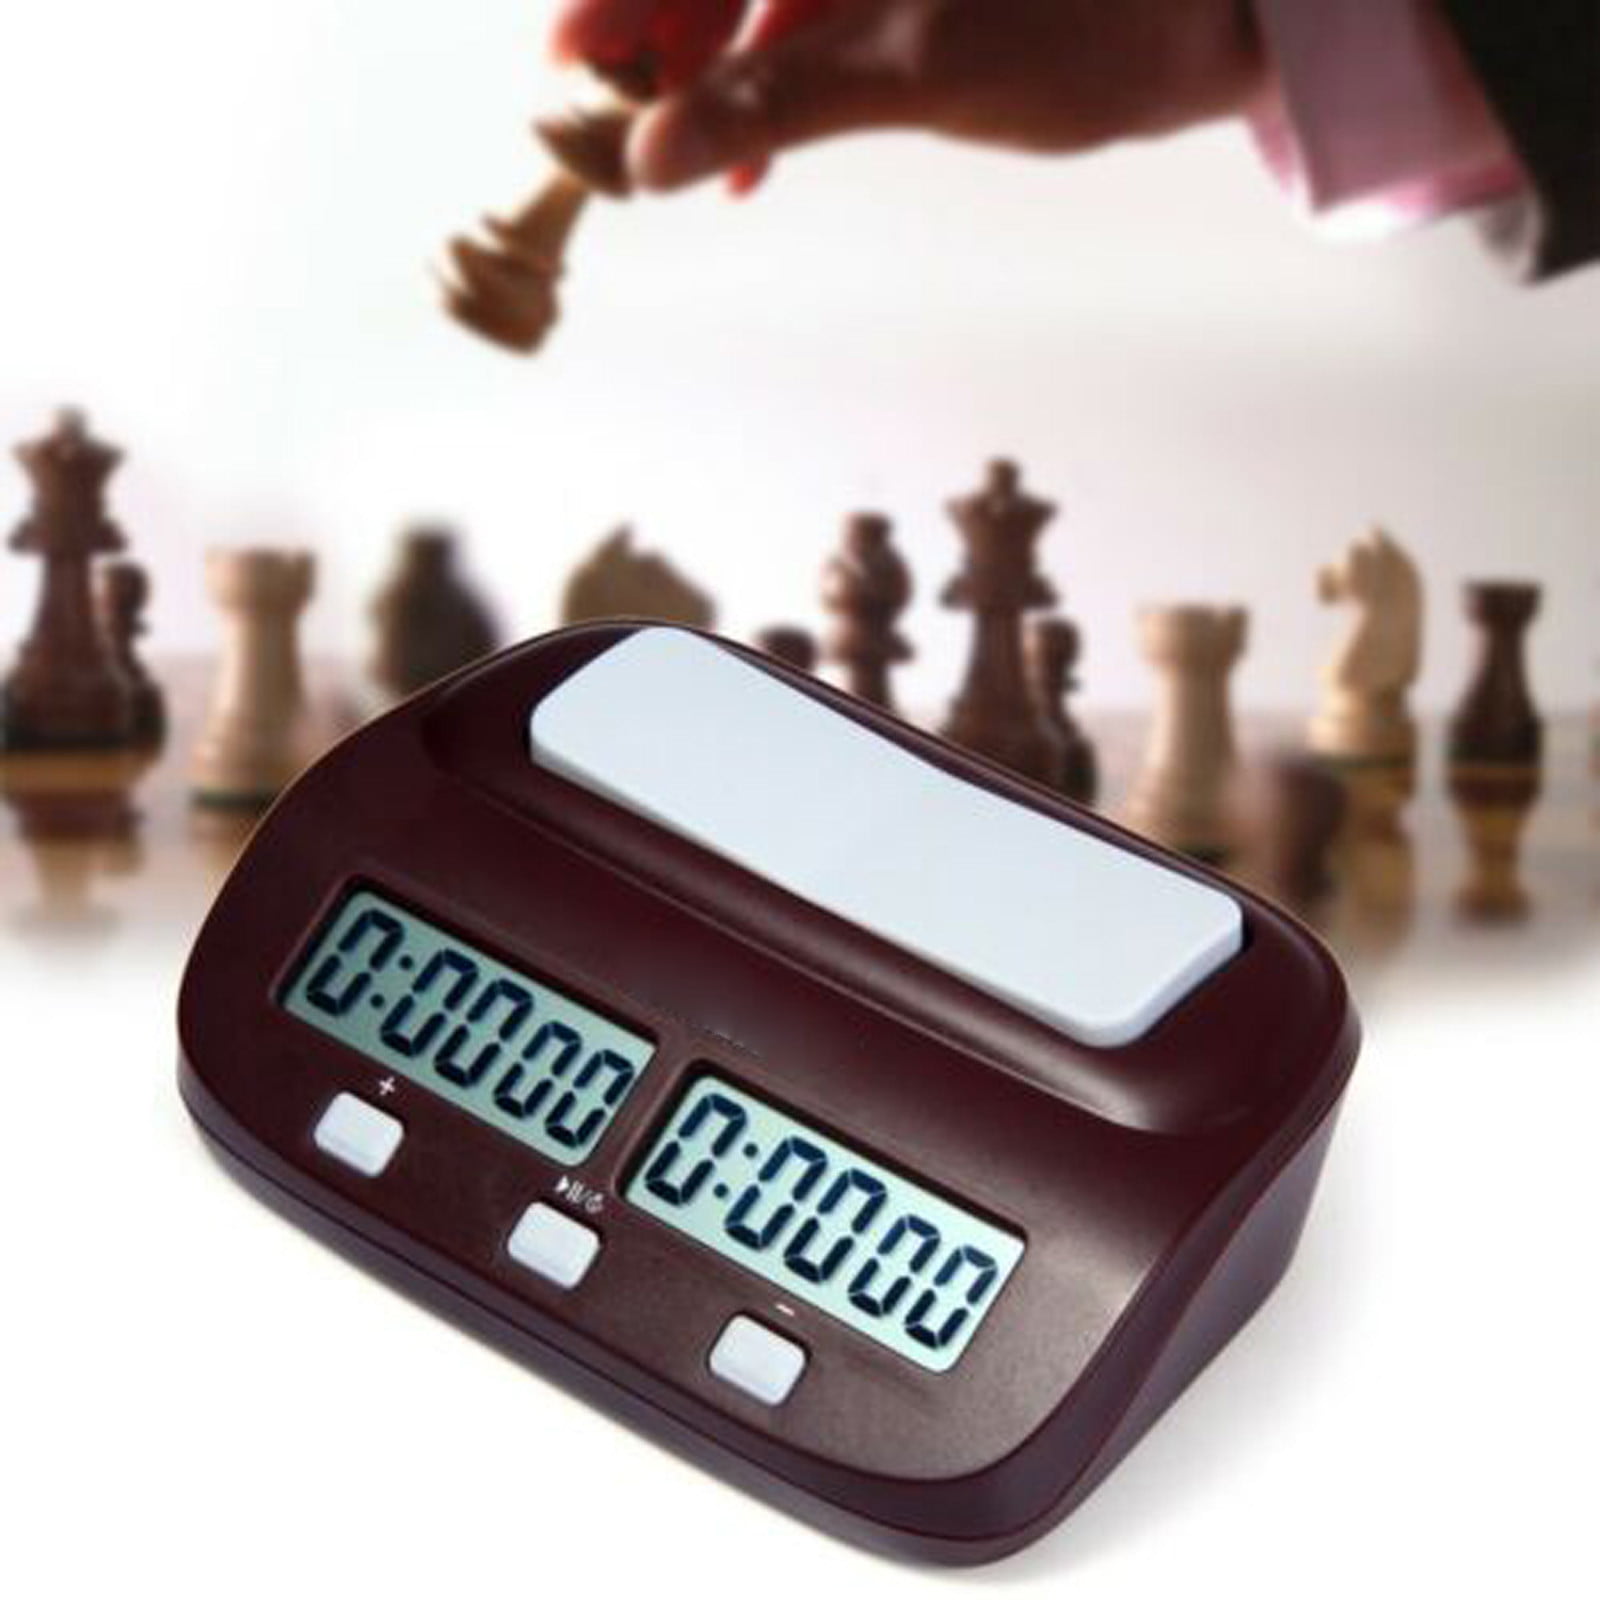 Professional Digital Chess Clock I-go Count Up Down Timer for Game Competition 